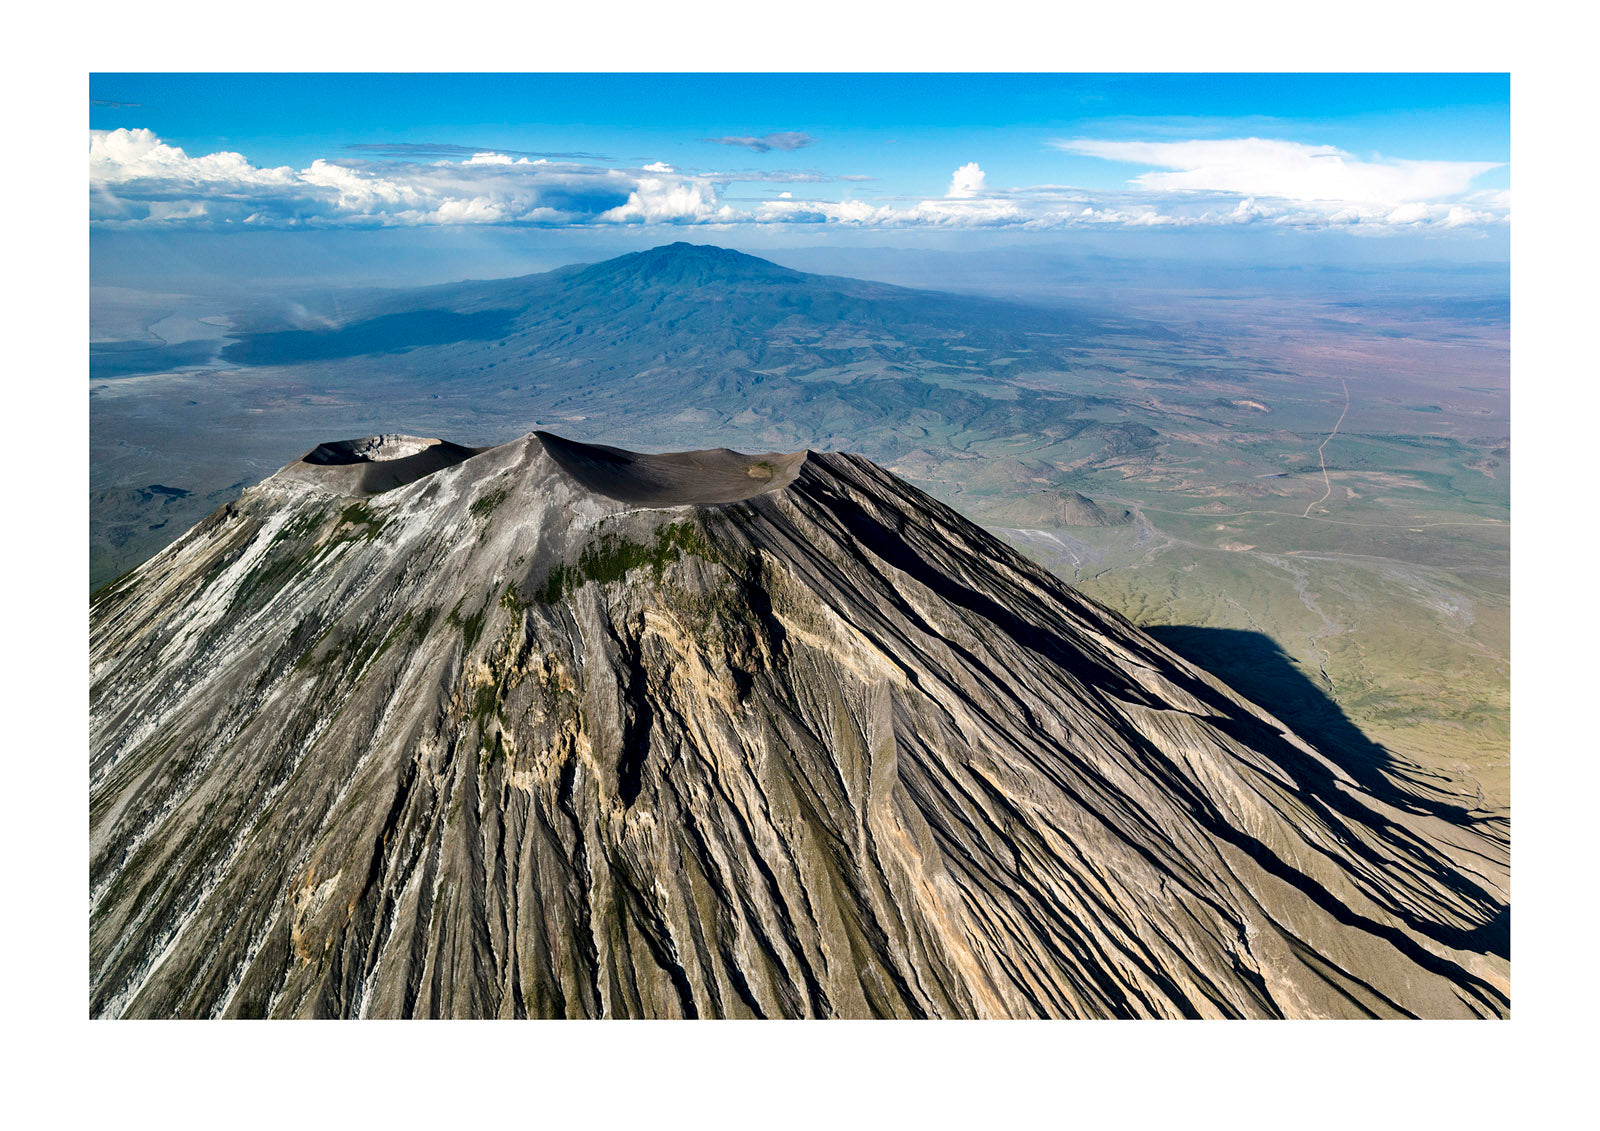 Sweeping lava flows and erosion on the slopes of a volcano caldera cone in the Great Rift Valley. Serengeti National Park, Oldonyo Lengai, Tanzania